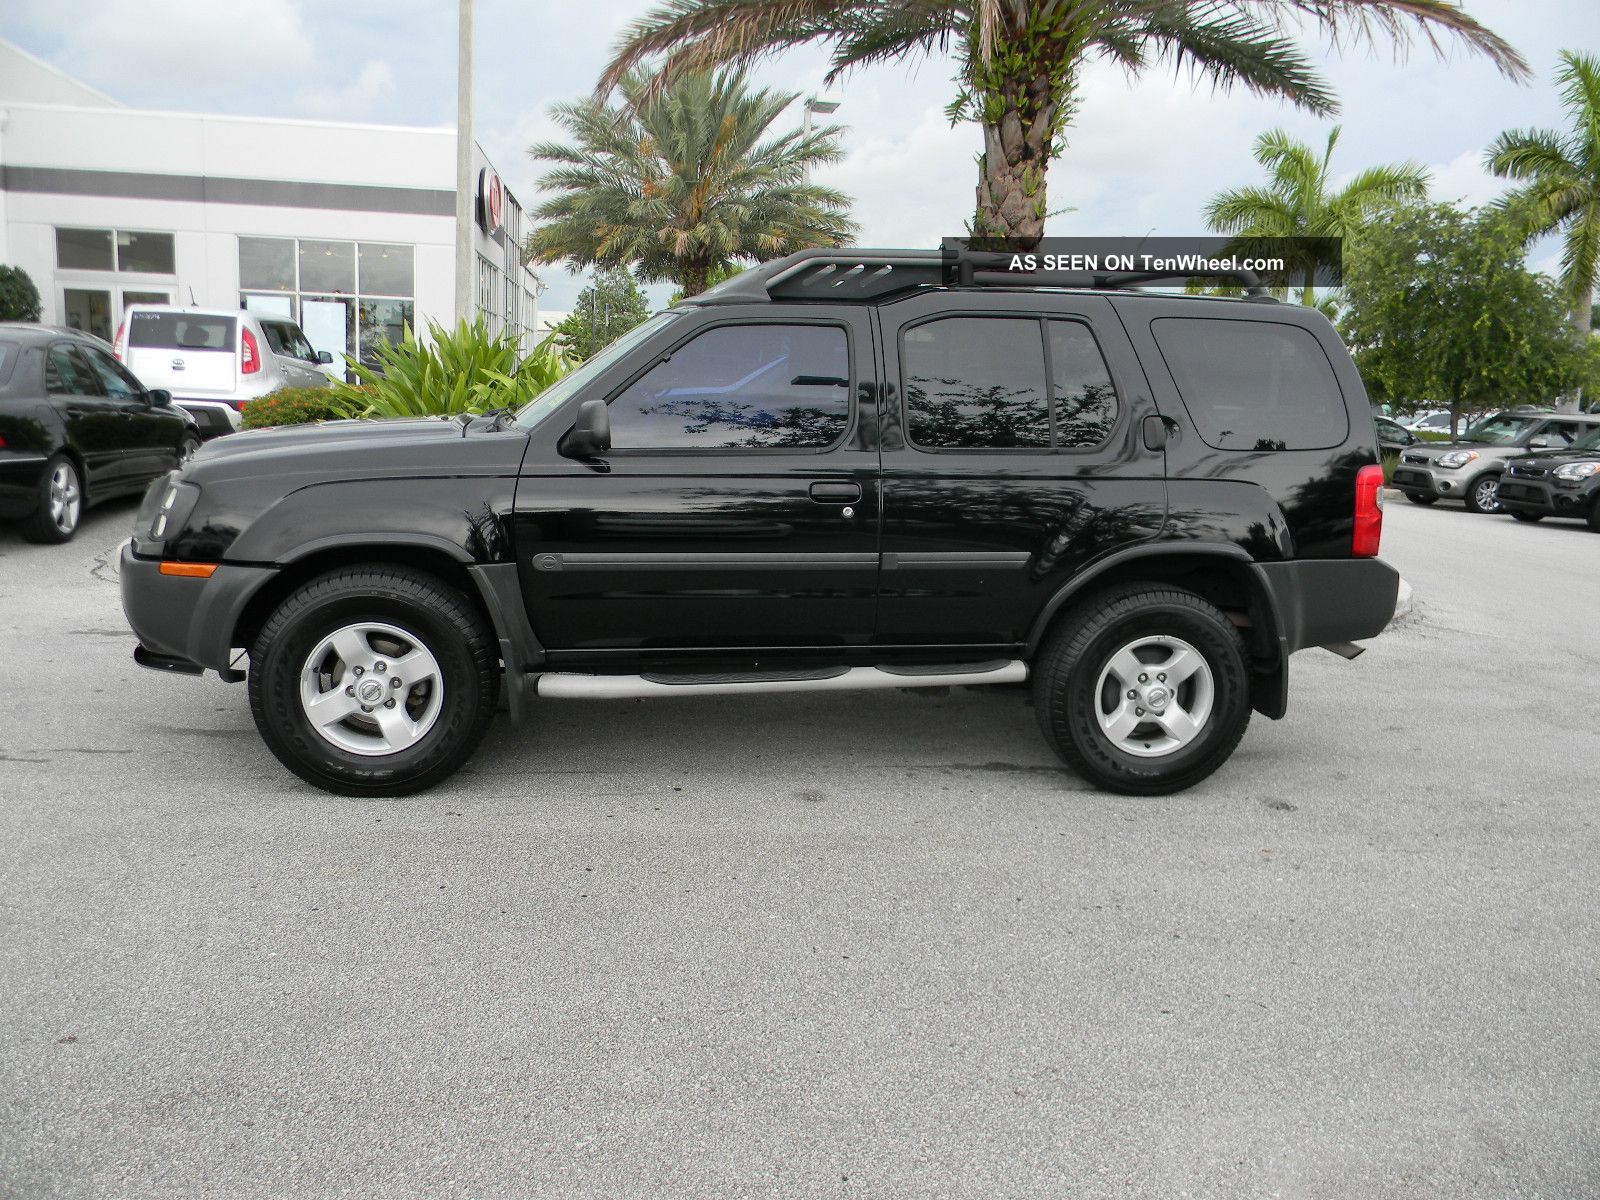 Looking for 2004 more nissan xterra sport utility vehicles #5